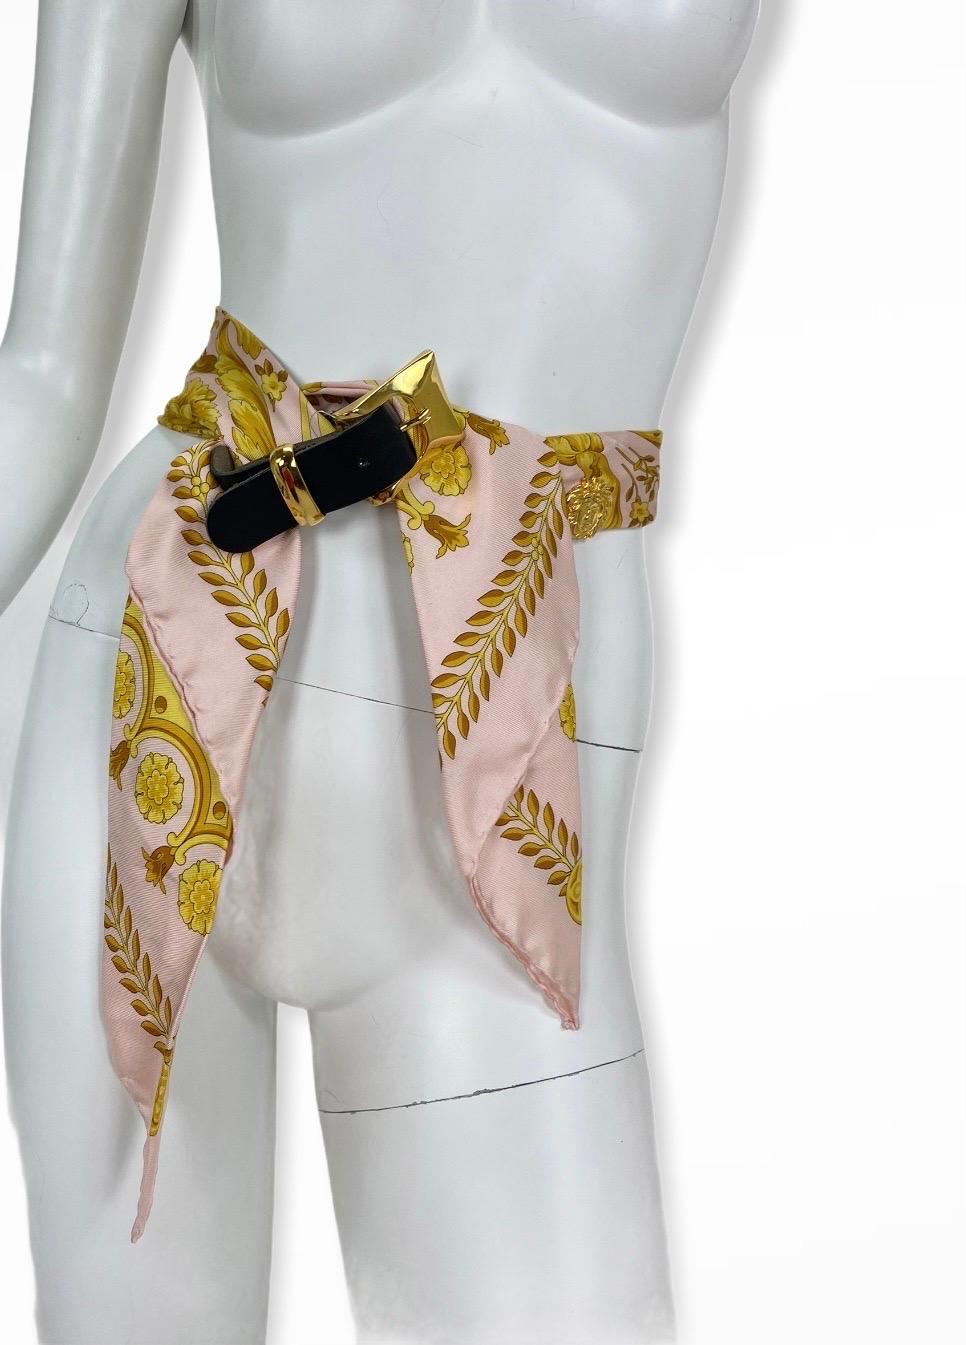 90-s Vintage Gianni Versace Atelier Barocco Scarf Silk with Bondage Belt Buckle For Sale 1